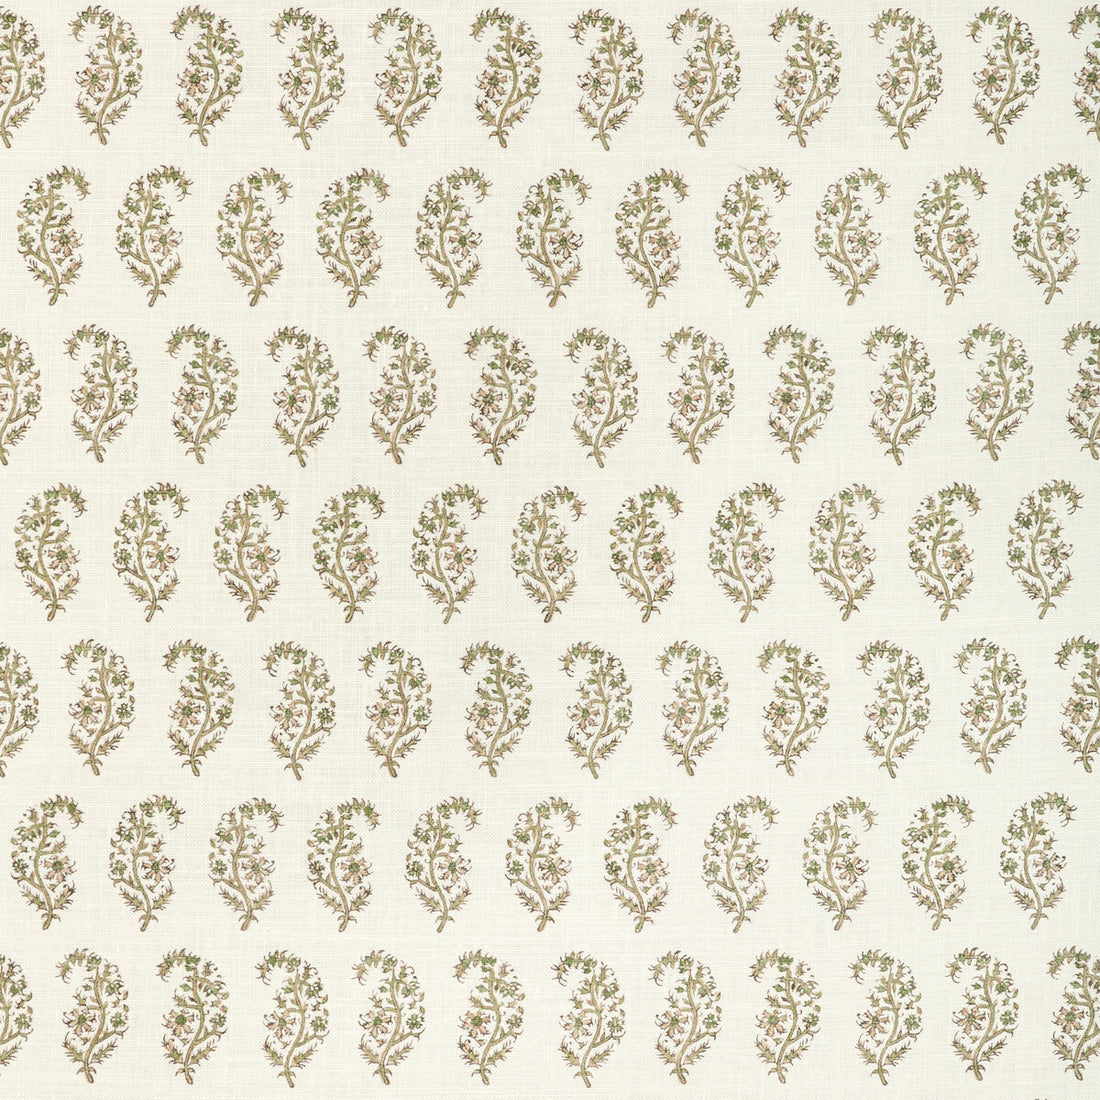 Indiennes Paisley fabric in ivy color - pattern 2022107.316.0 - by Lee Jofa in the Sarah Bartholomew collection